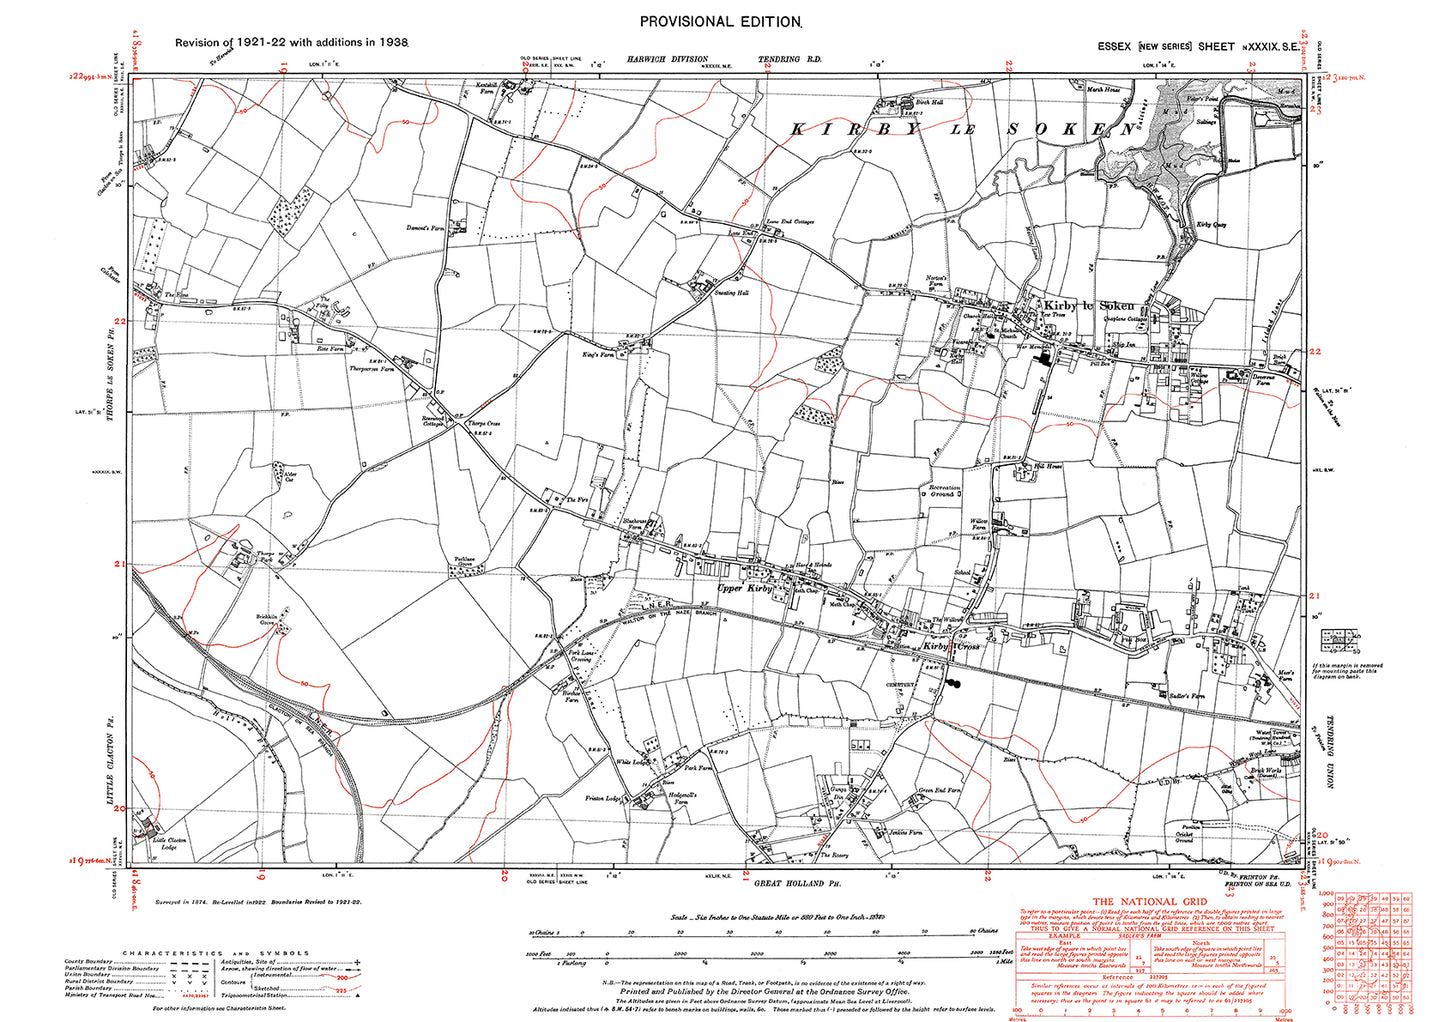 Old OS map dated 1938, showing Kirby le Soken, Upper Kirby and Kirby Cross in Essex - 39SE